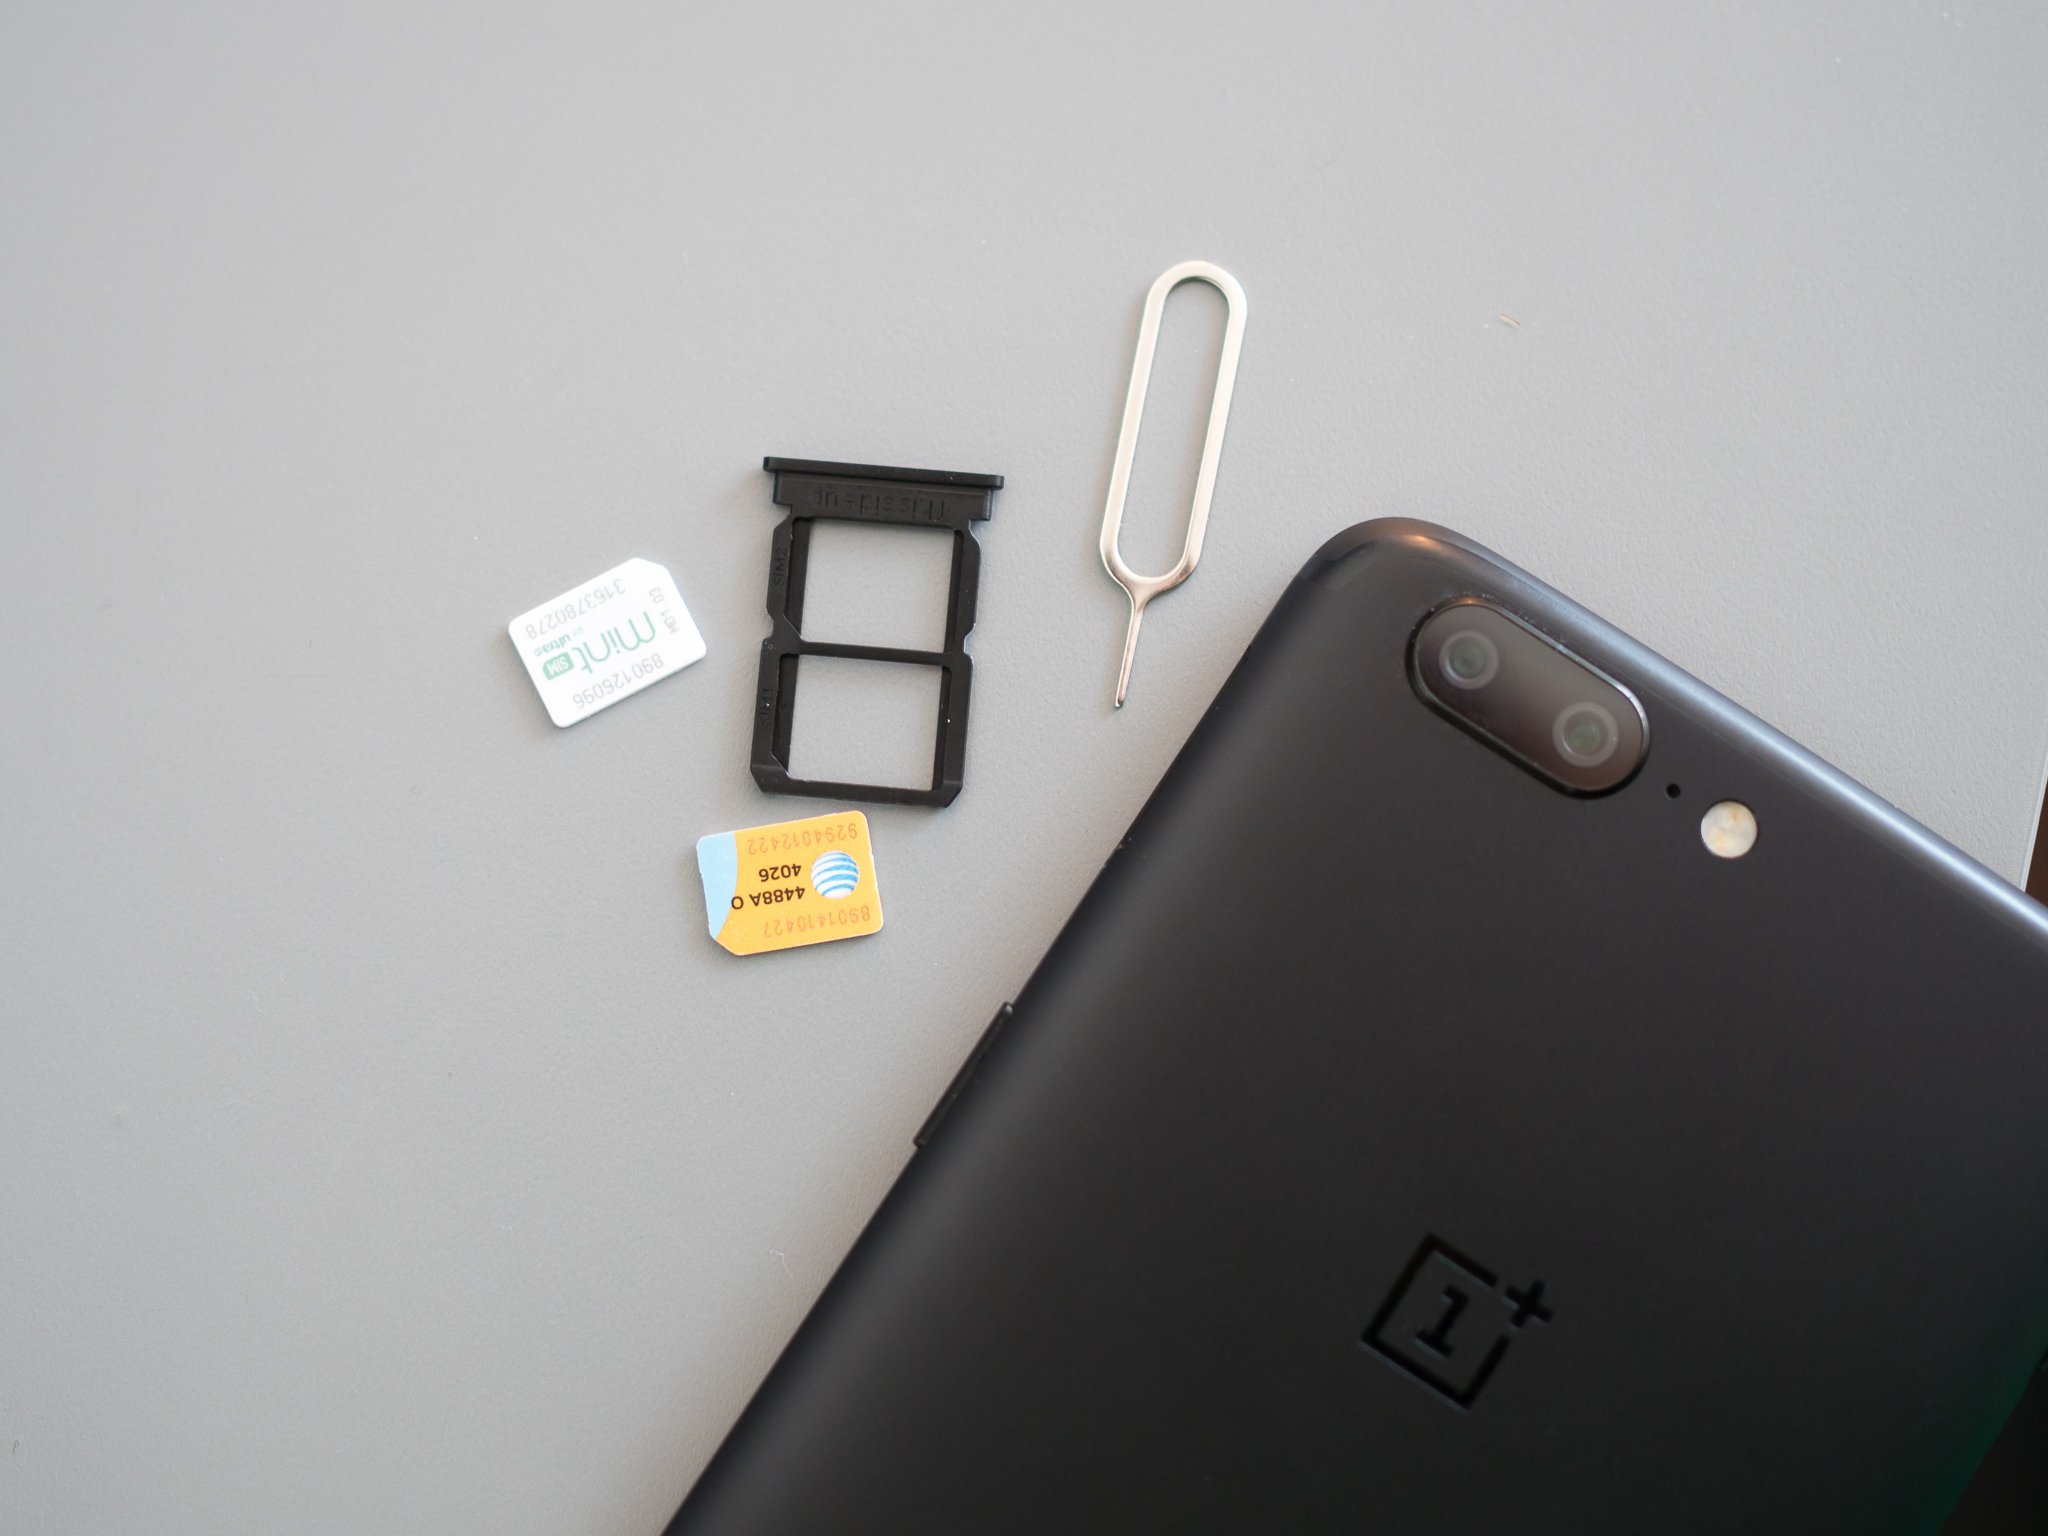 What You Need To Know About Dual Sim On The Oneplus 5 Android